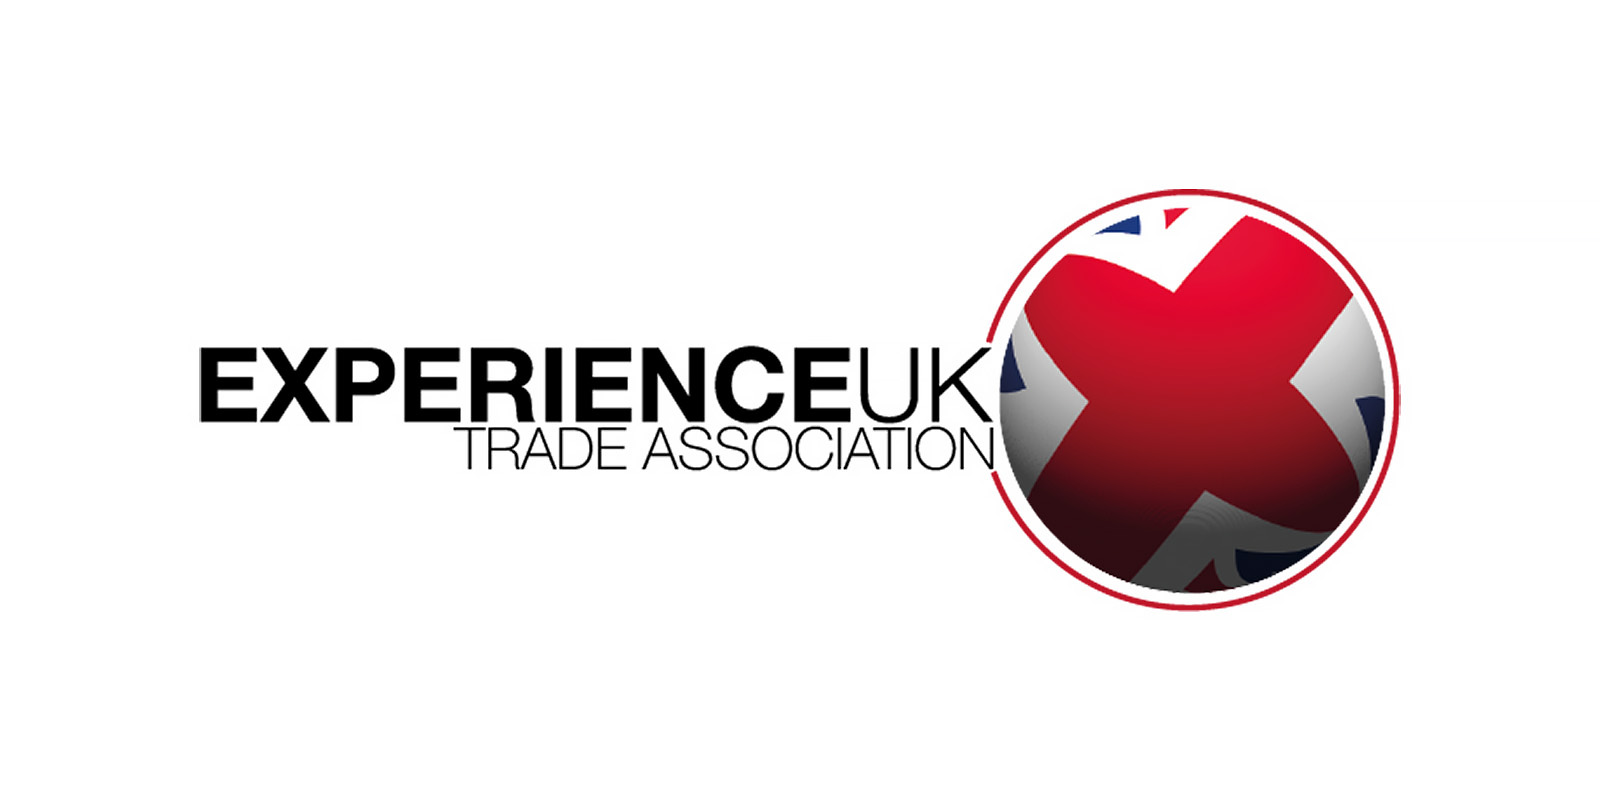 David Willrich Appointed Chair of Experience UK